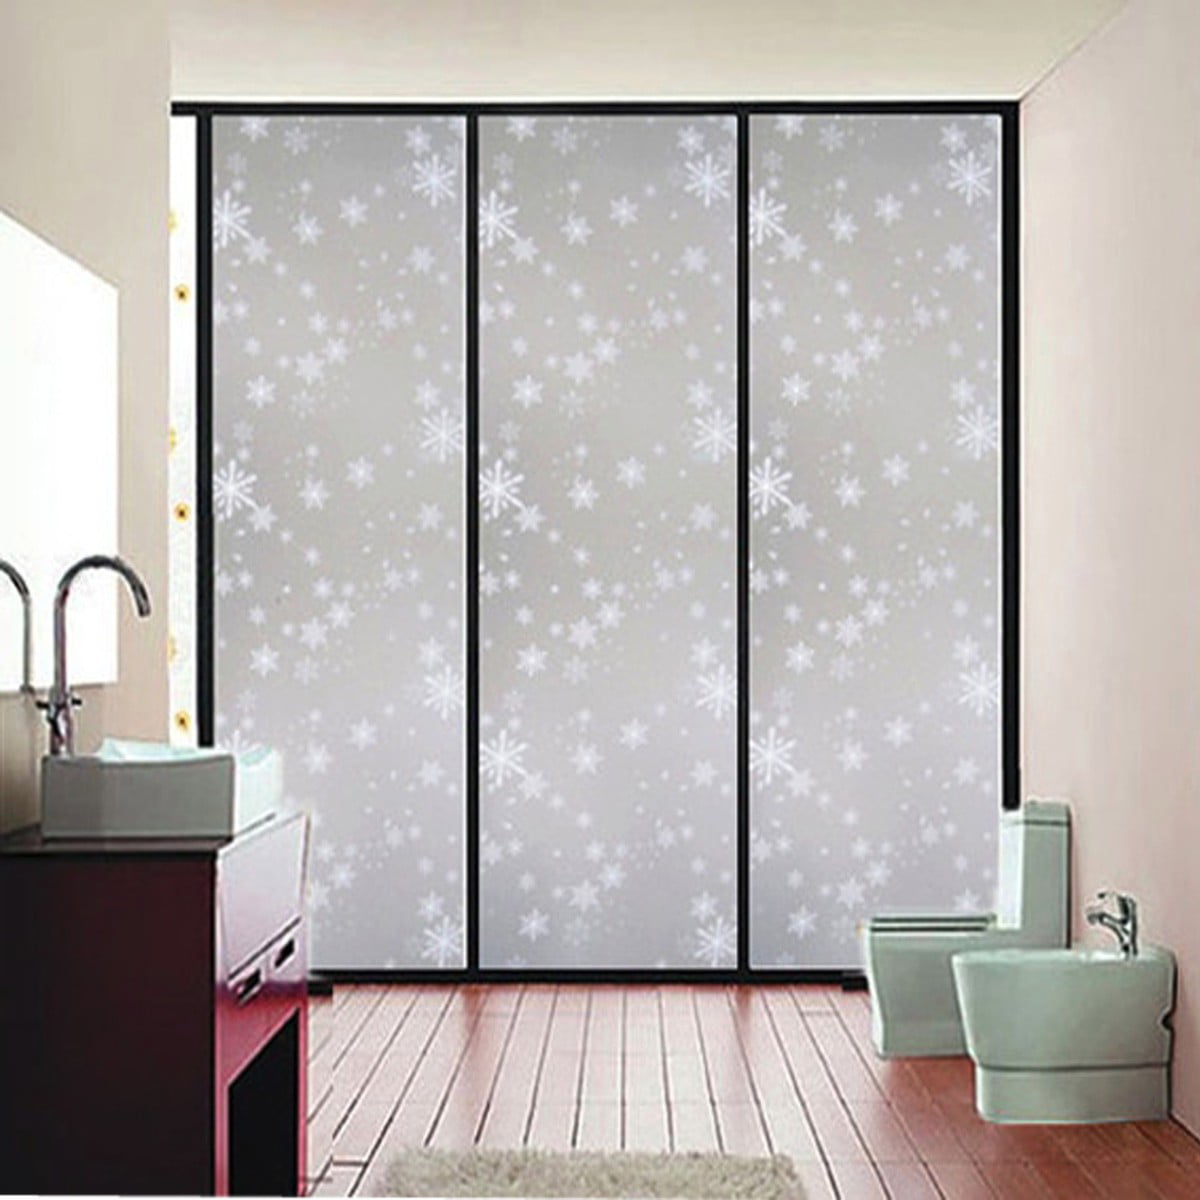 45x200cm Frosted Privacy Room Bathroom Window Glass Self-Adhesive Film Sticker 